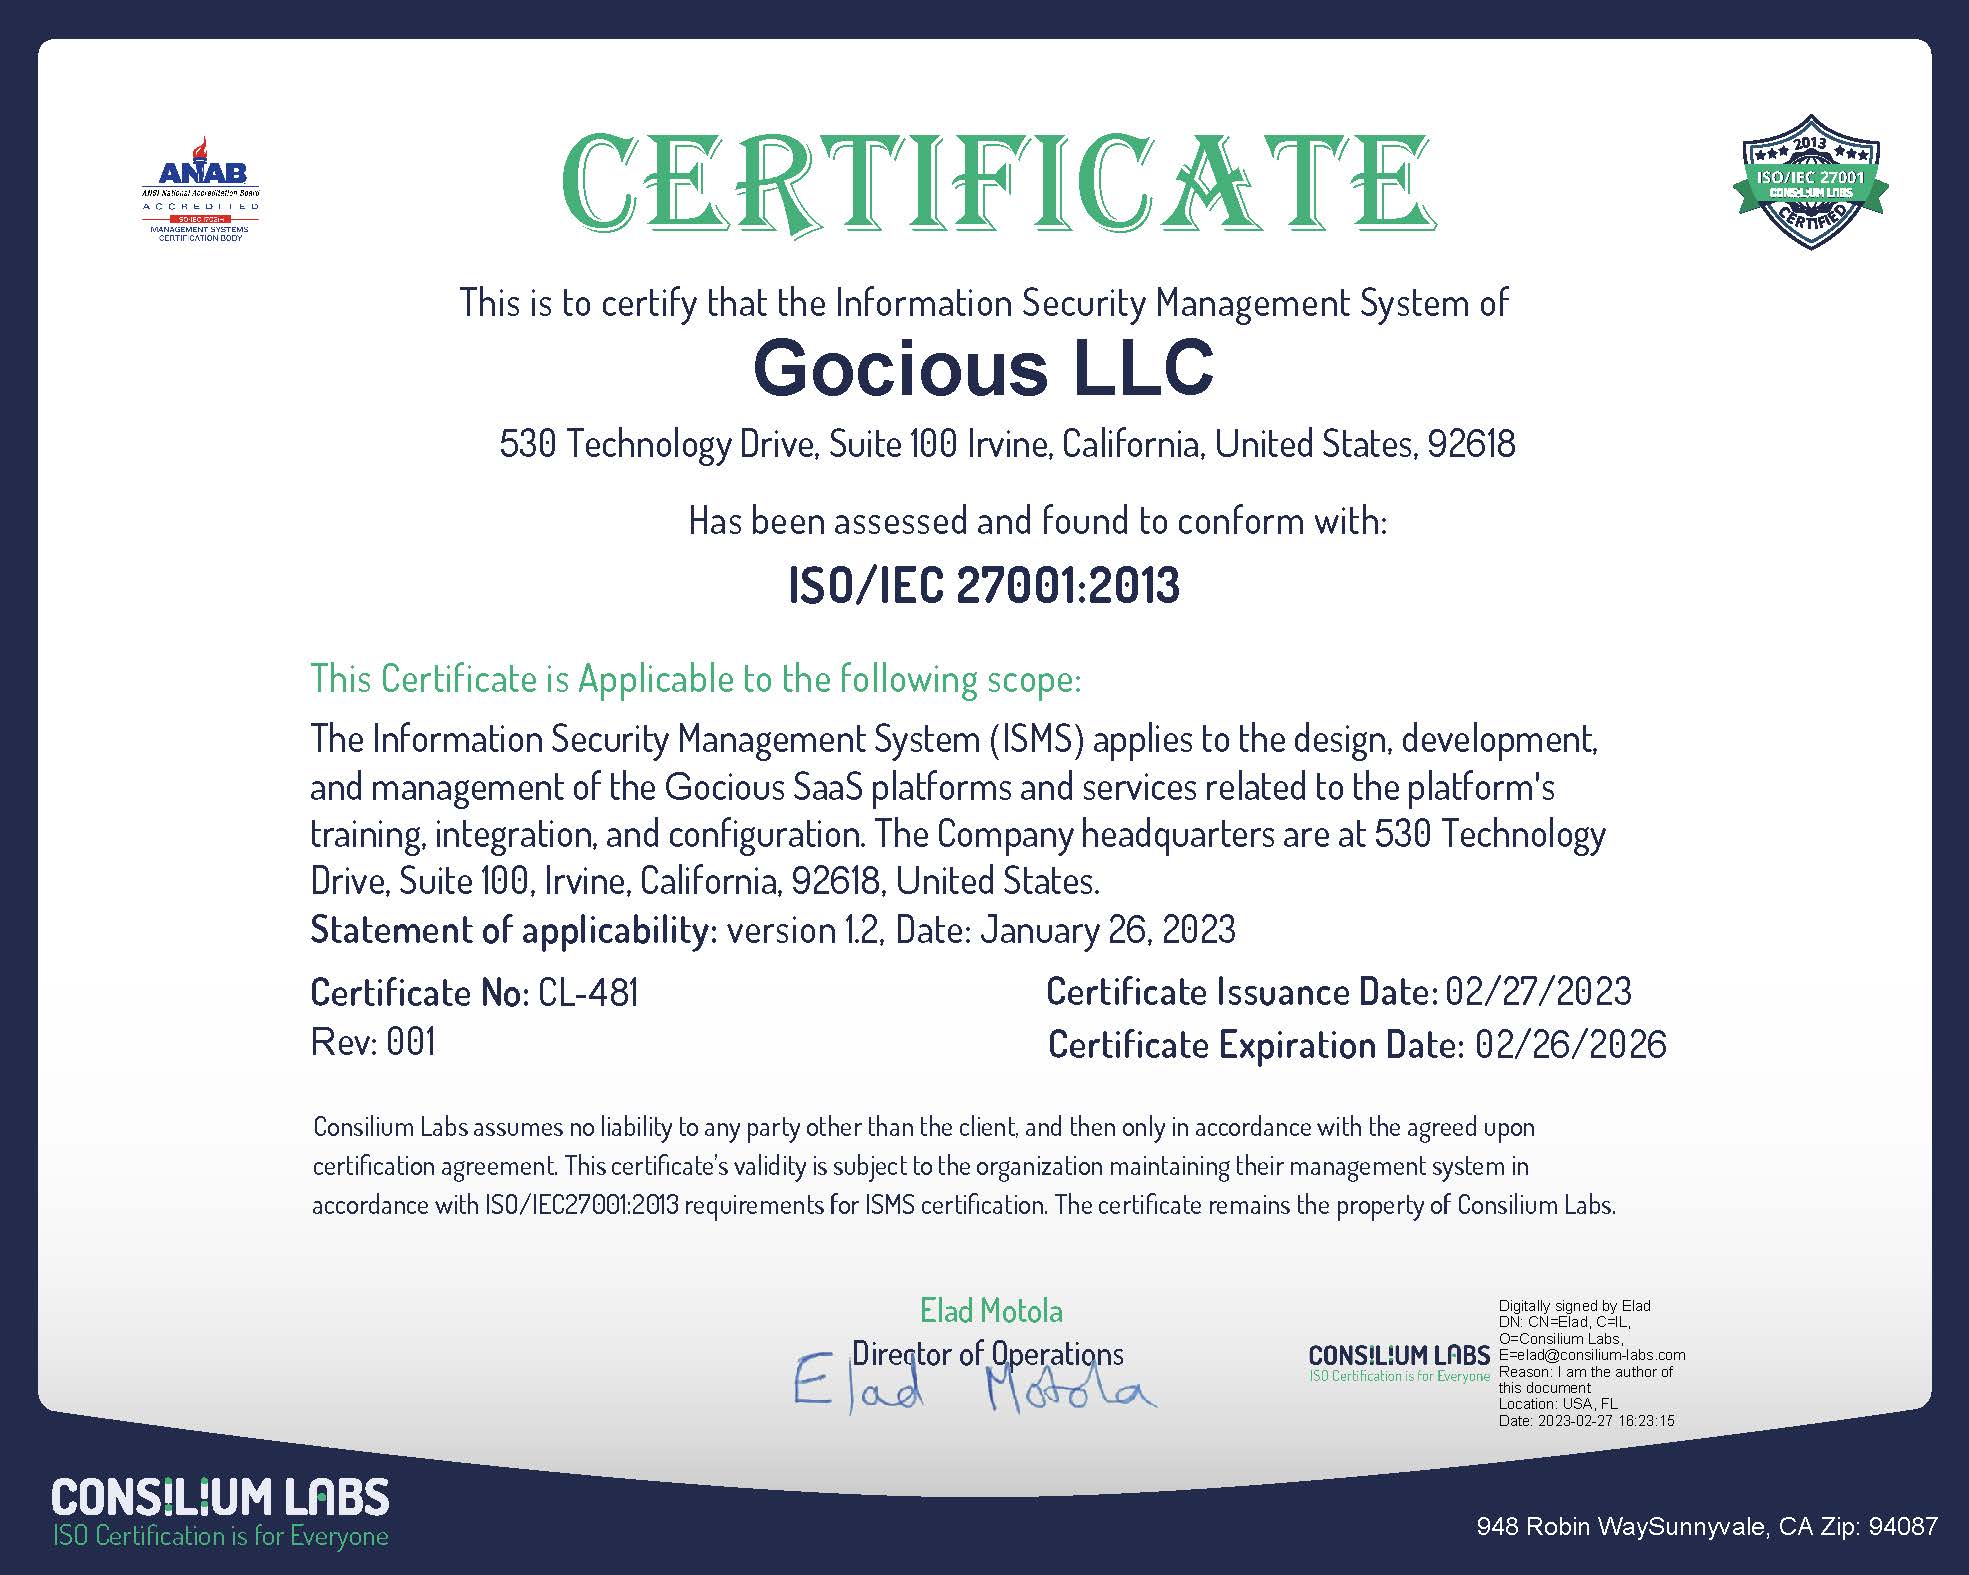 ISO/IEC 27001:2013 signed certificate